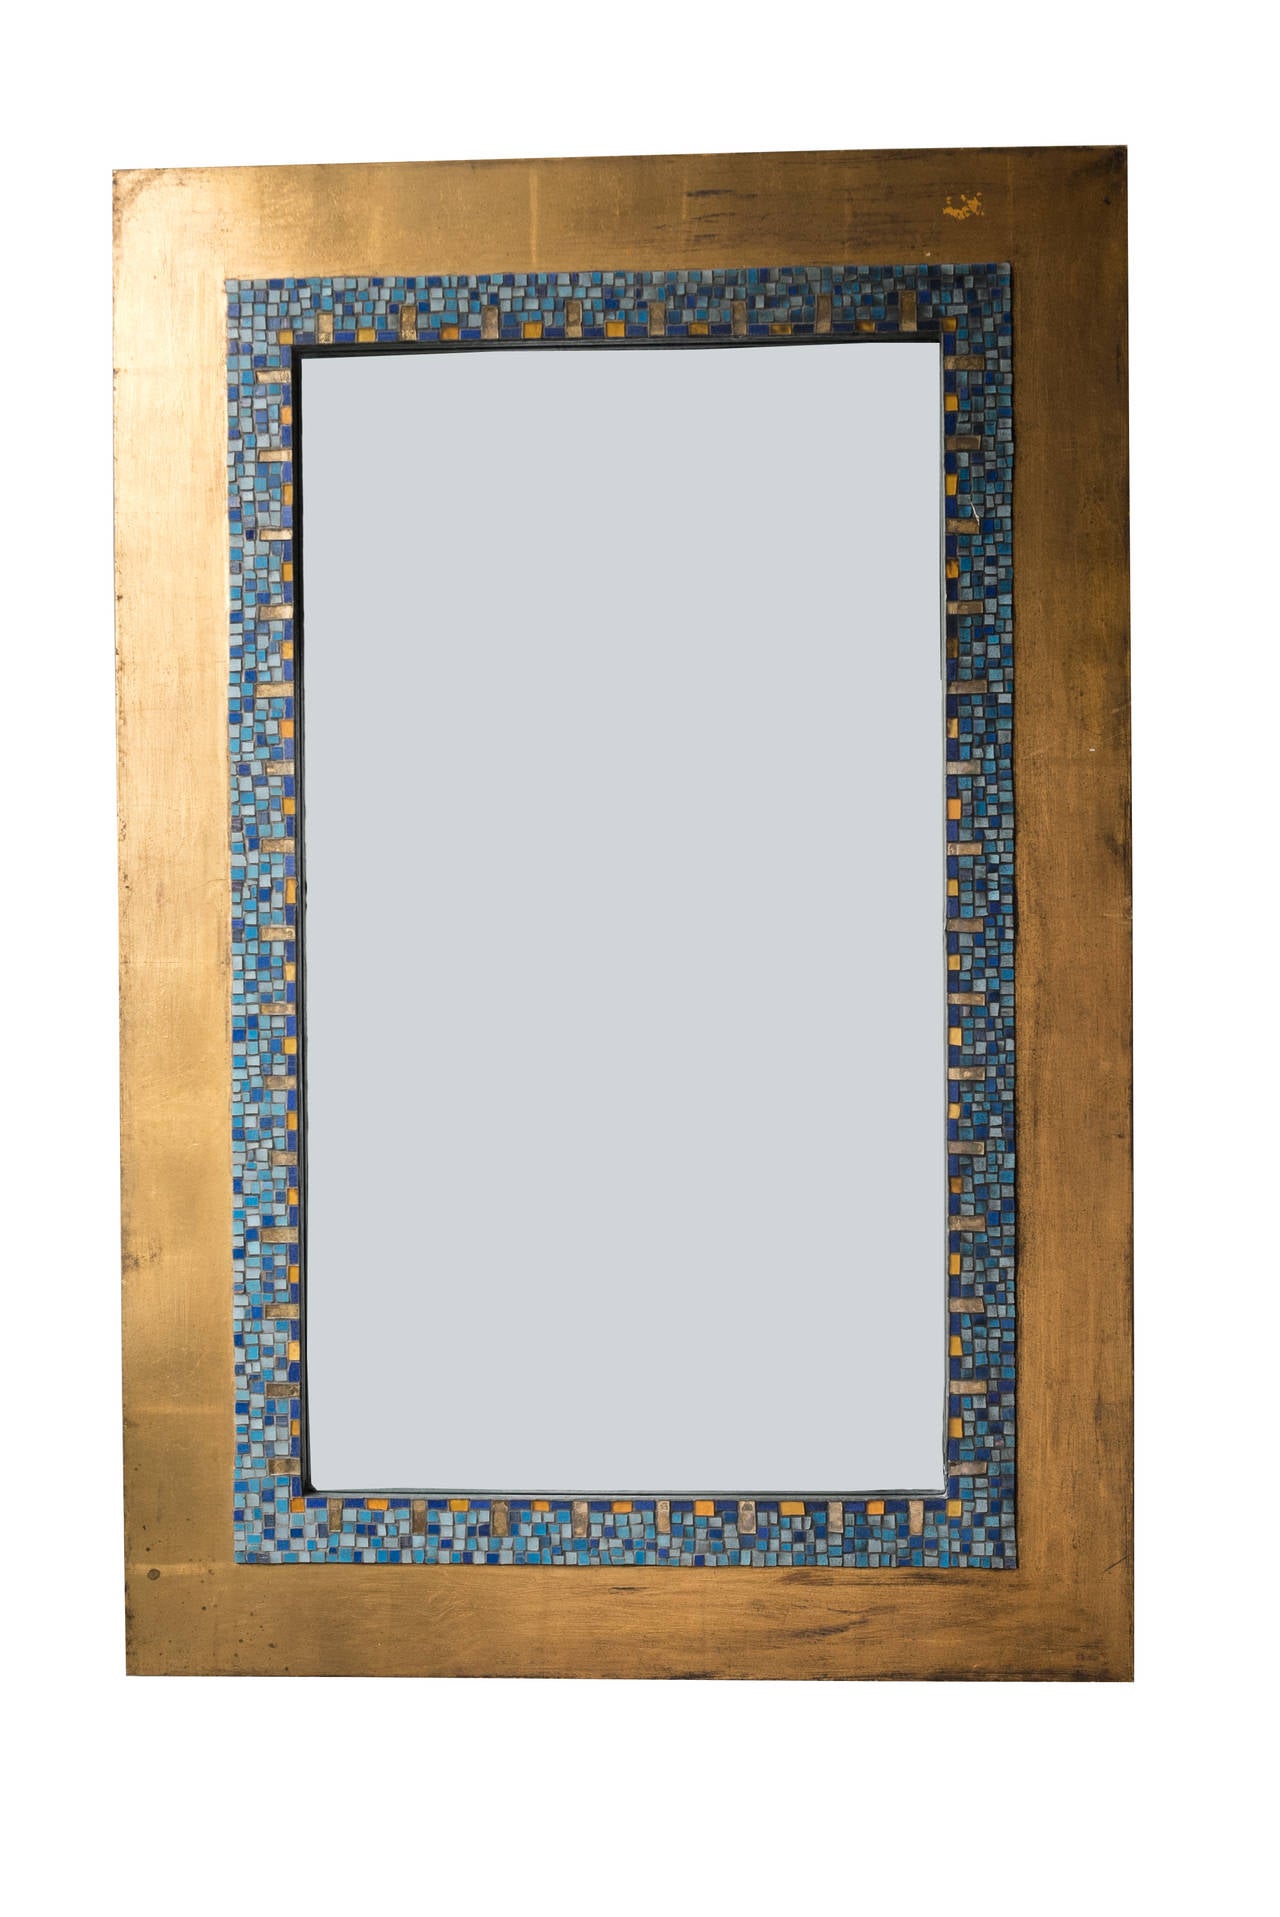 This oversize frame and mirror features a blue glass and gold gilt tile surrounded by a border of gold metal leaf. It is either of French or Italian origin, from the late 1940s-early 1950s. It is in very good condition.

 
Materials: Glass tile,